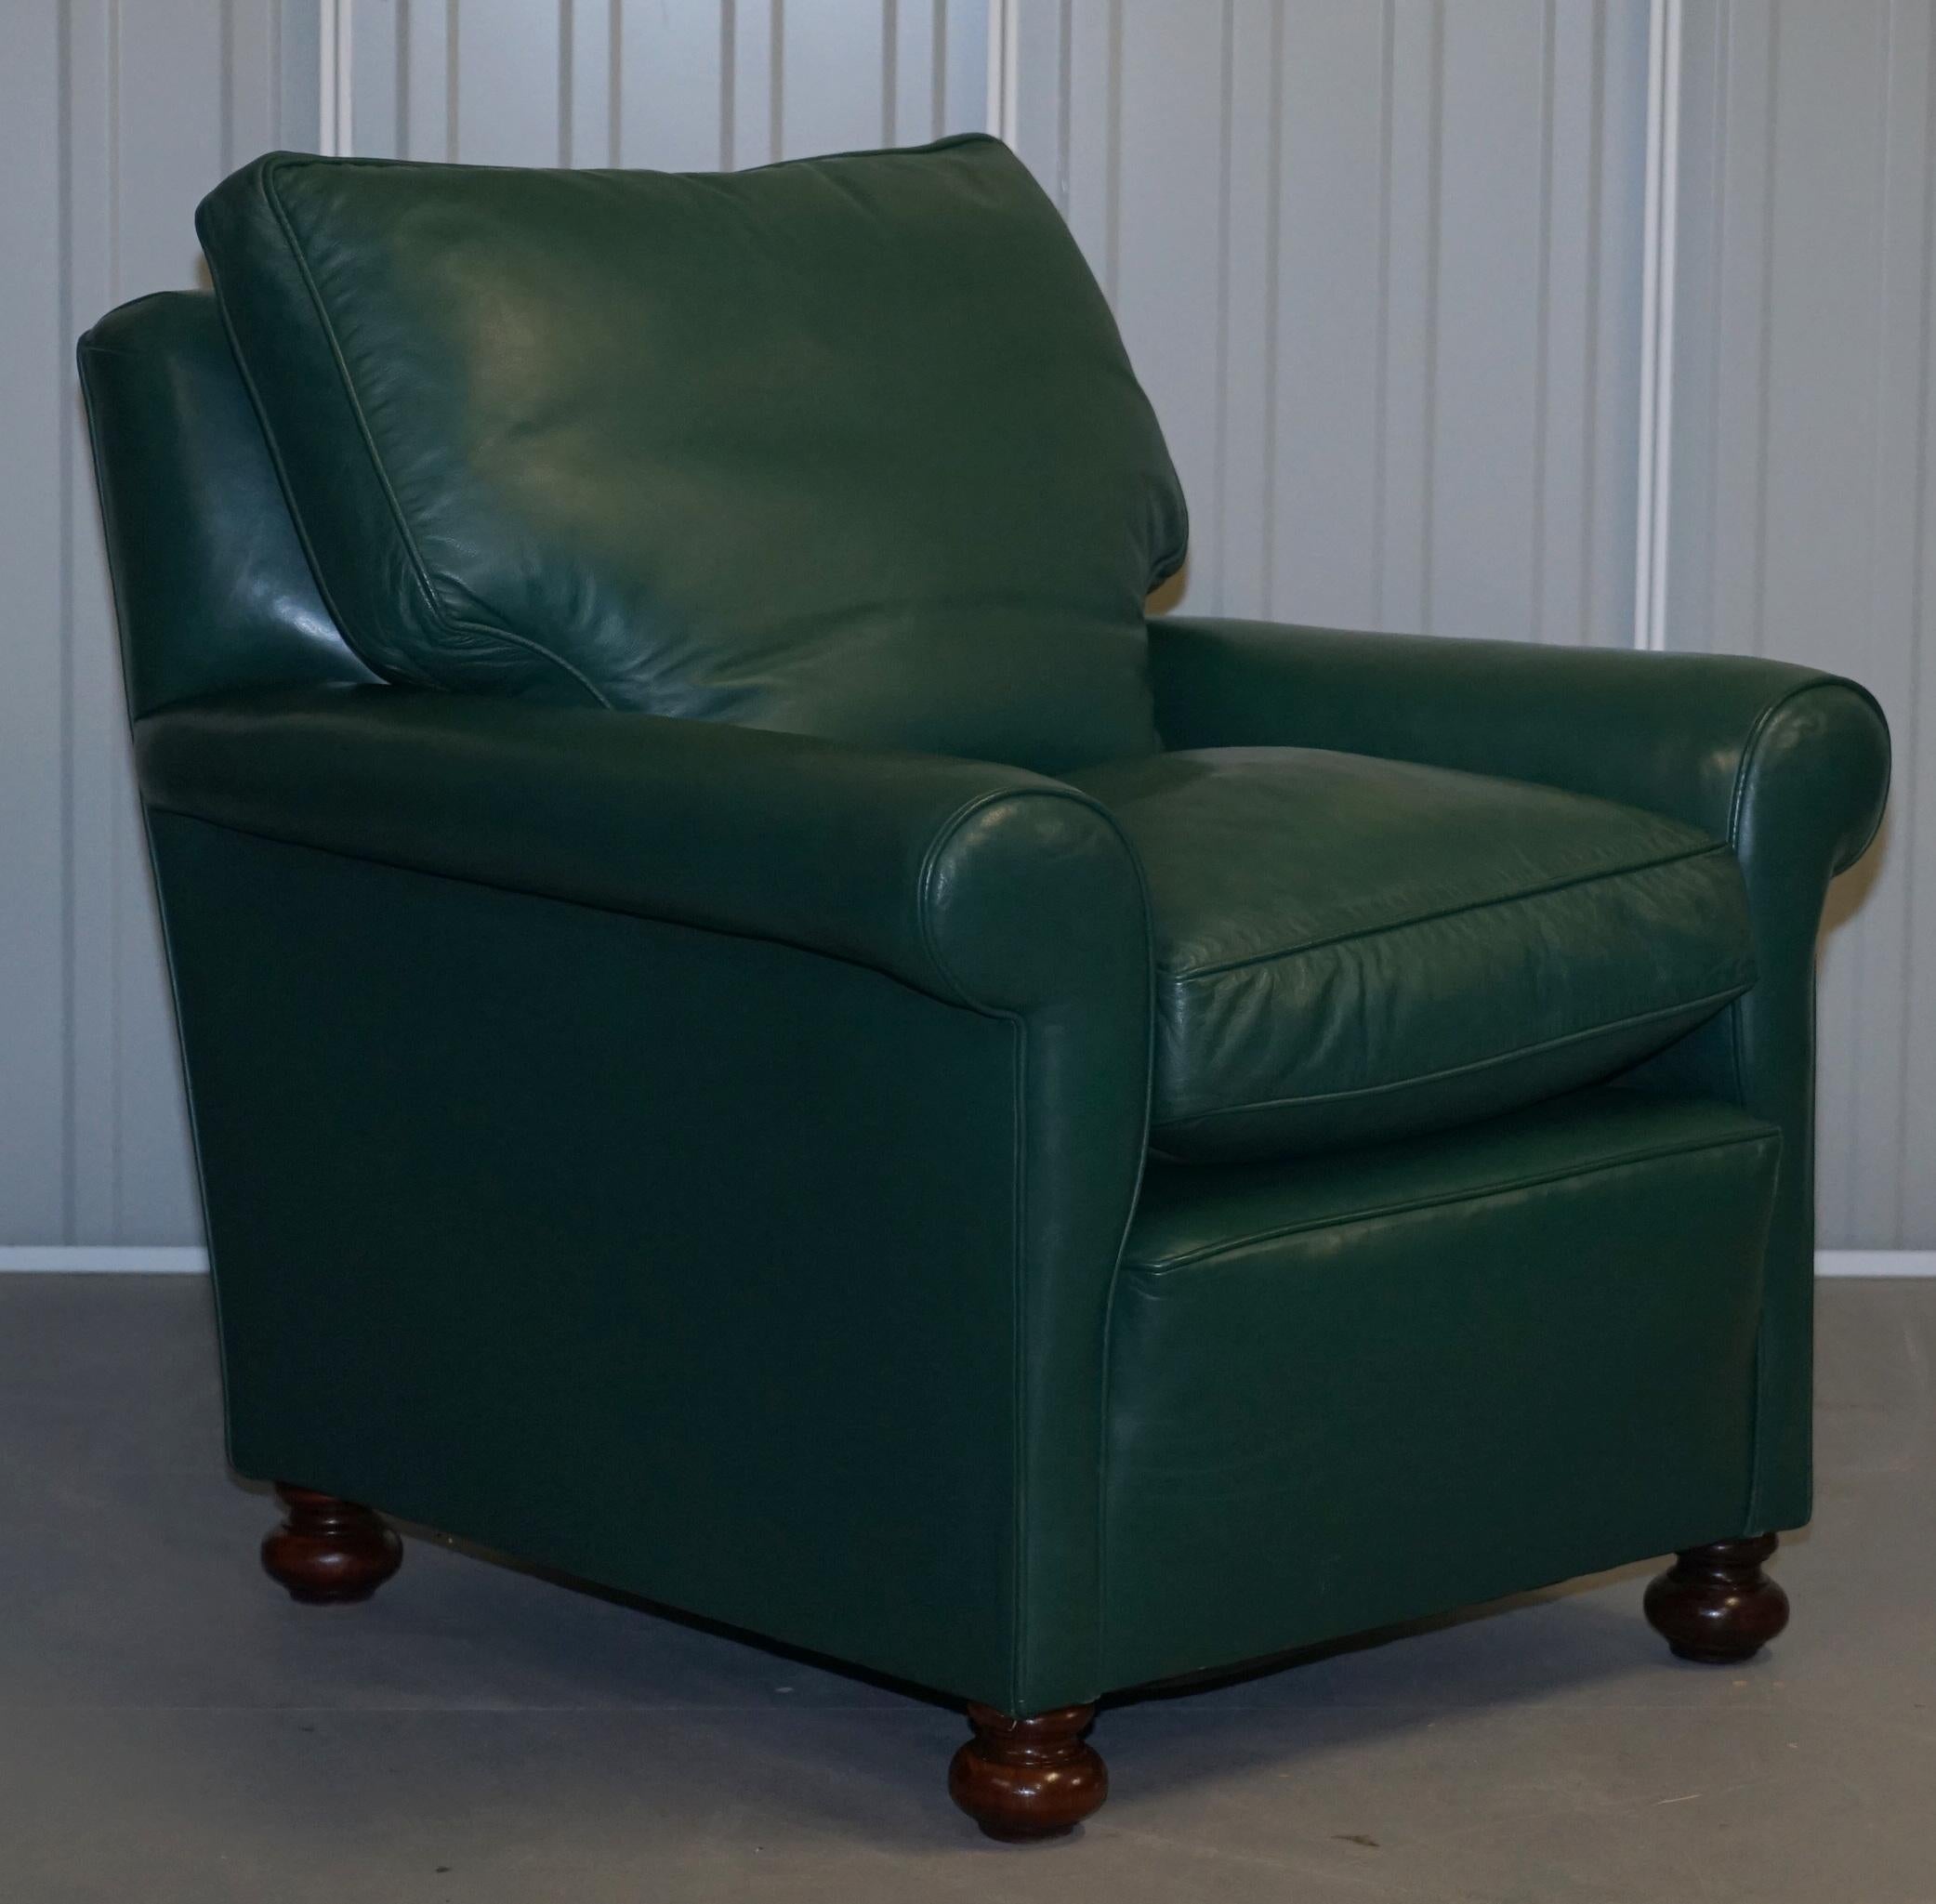 We are delighted to offer for sale this stunning pair of Edwardian circa 1910 soft green leather “his and hers” club armchairs with feather filled cushions

A very nice and comfortable pair of 110+ year old armchairs. The green leather upholstery